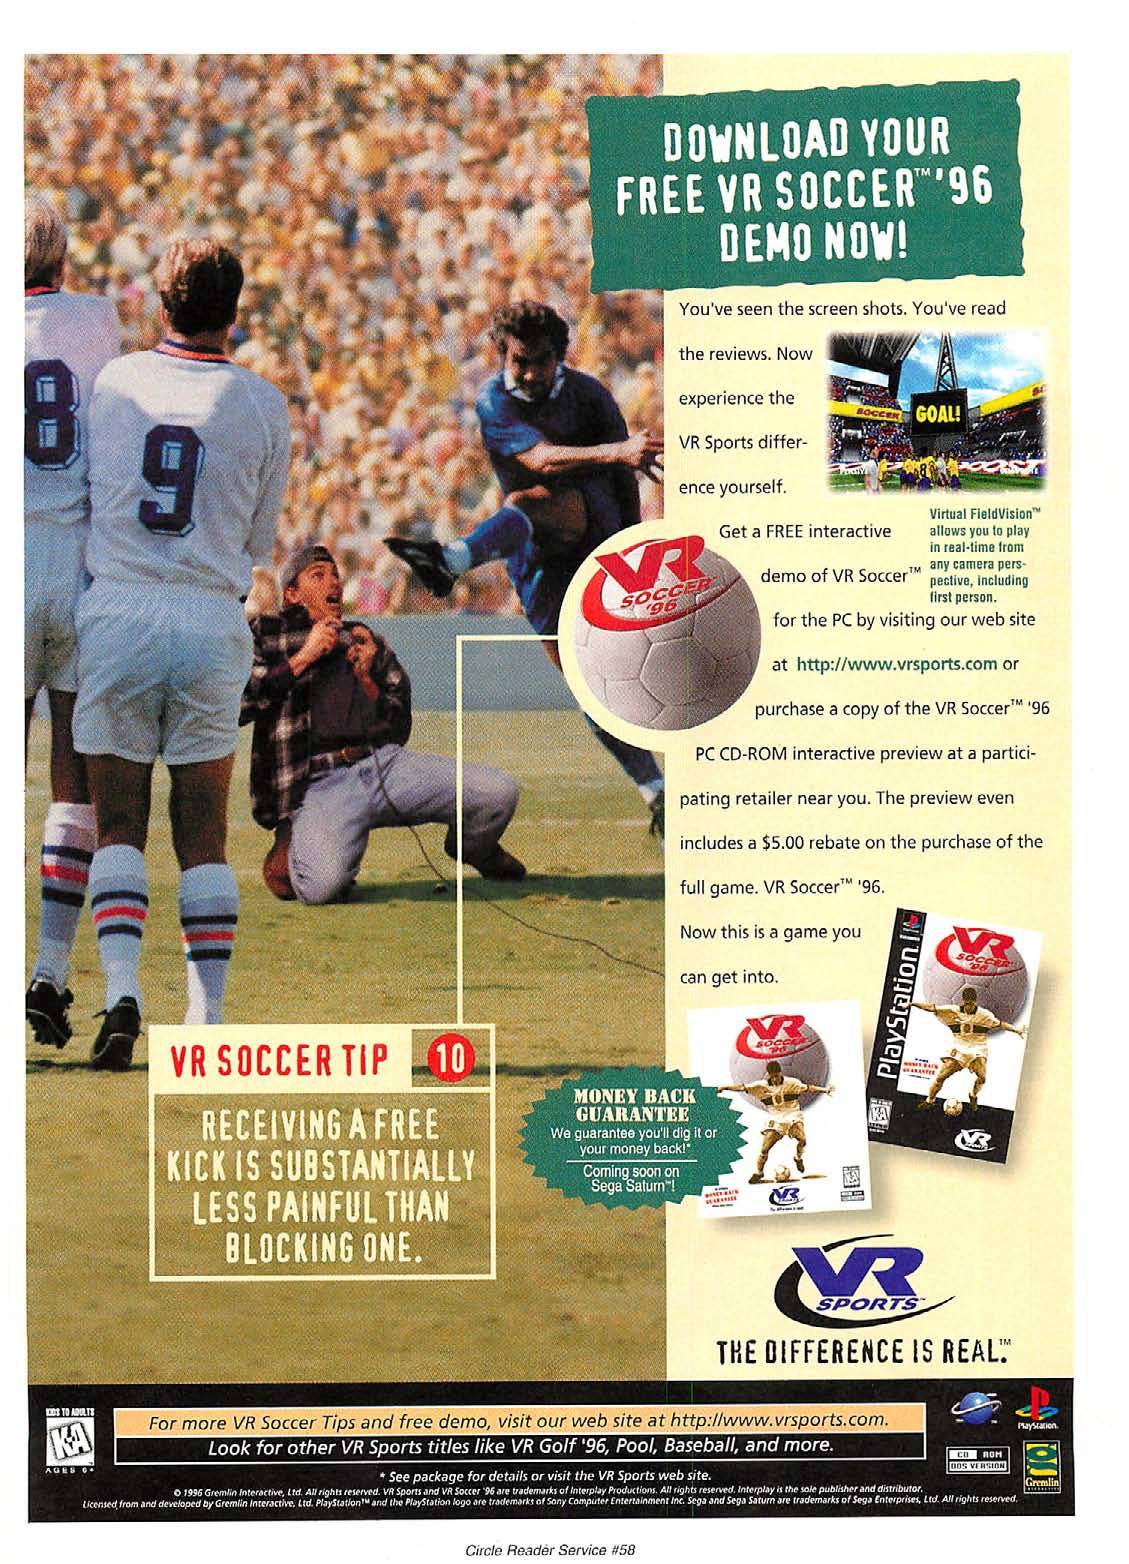 “VR Soccer ‘96”
• Computer Gaming World, June 1996 (#143)
• Uploaded by CGW Museum